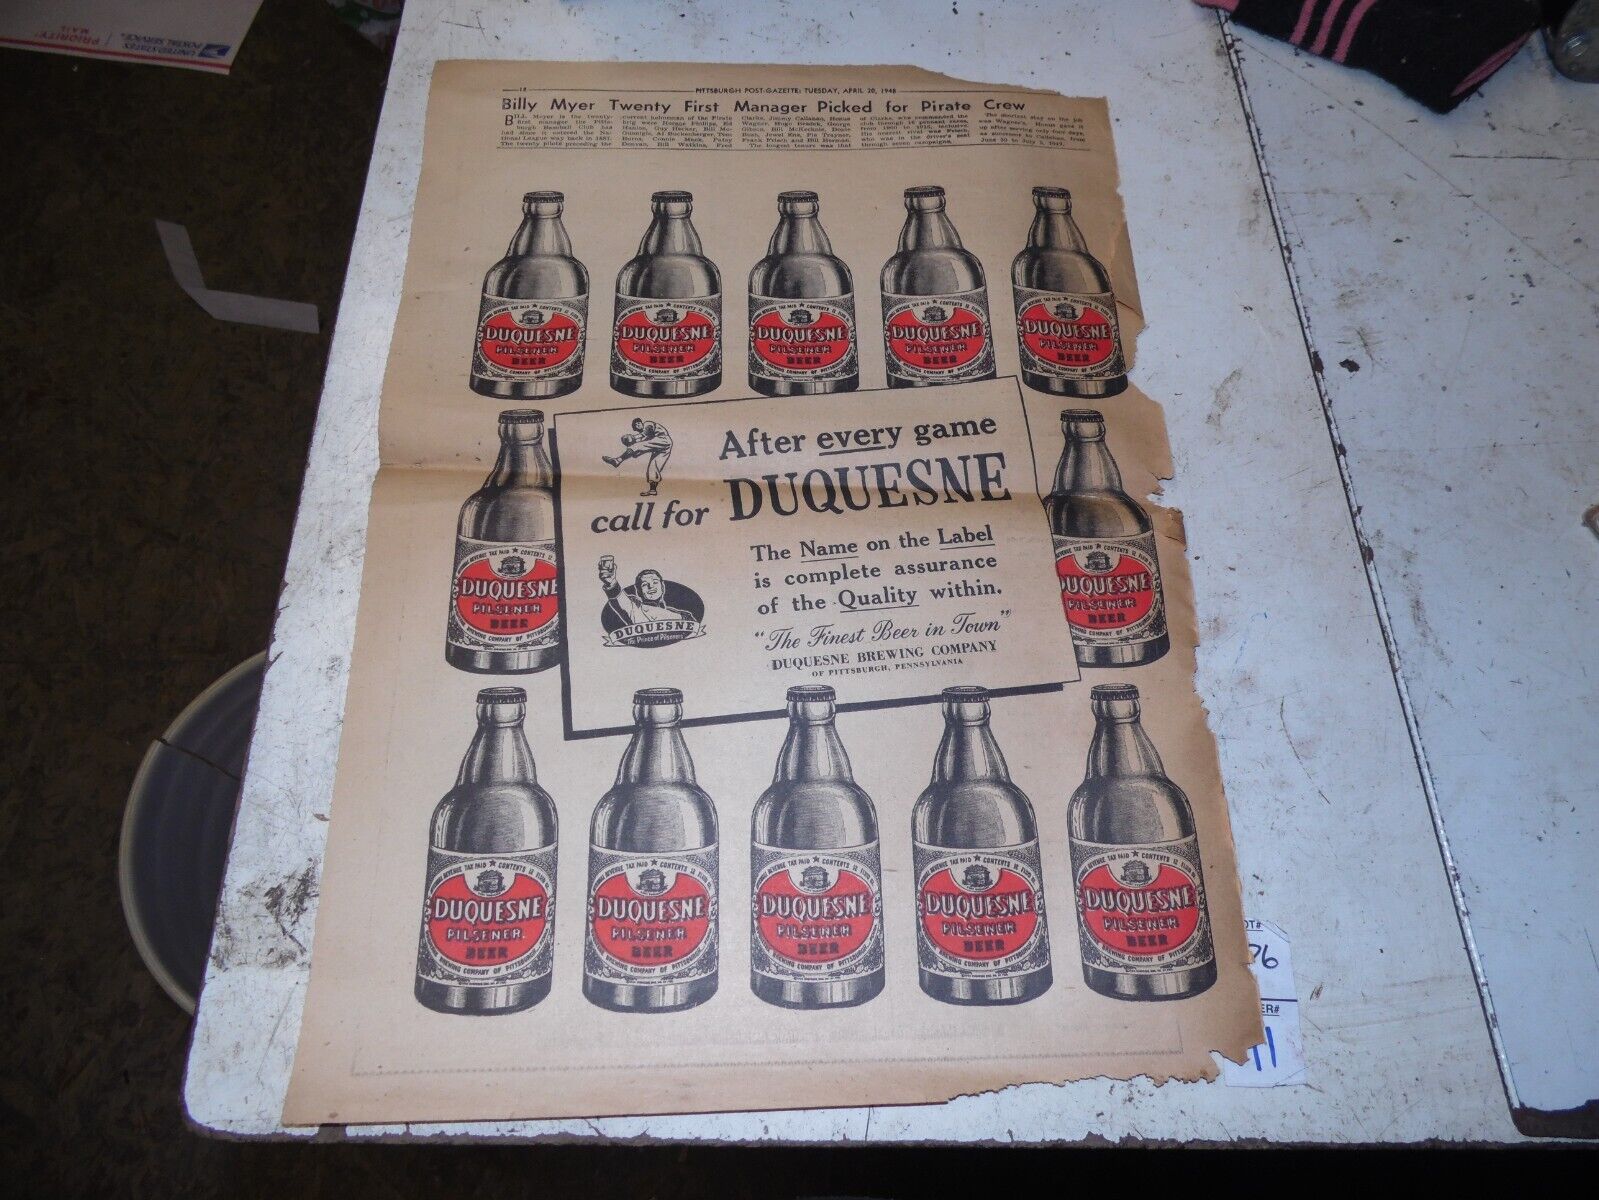 Vintage 1948 Duquesne Beer Newspaper Ad Advertising - After Every Game....